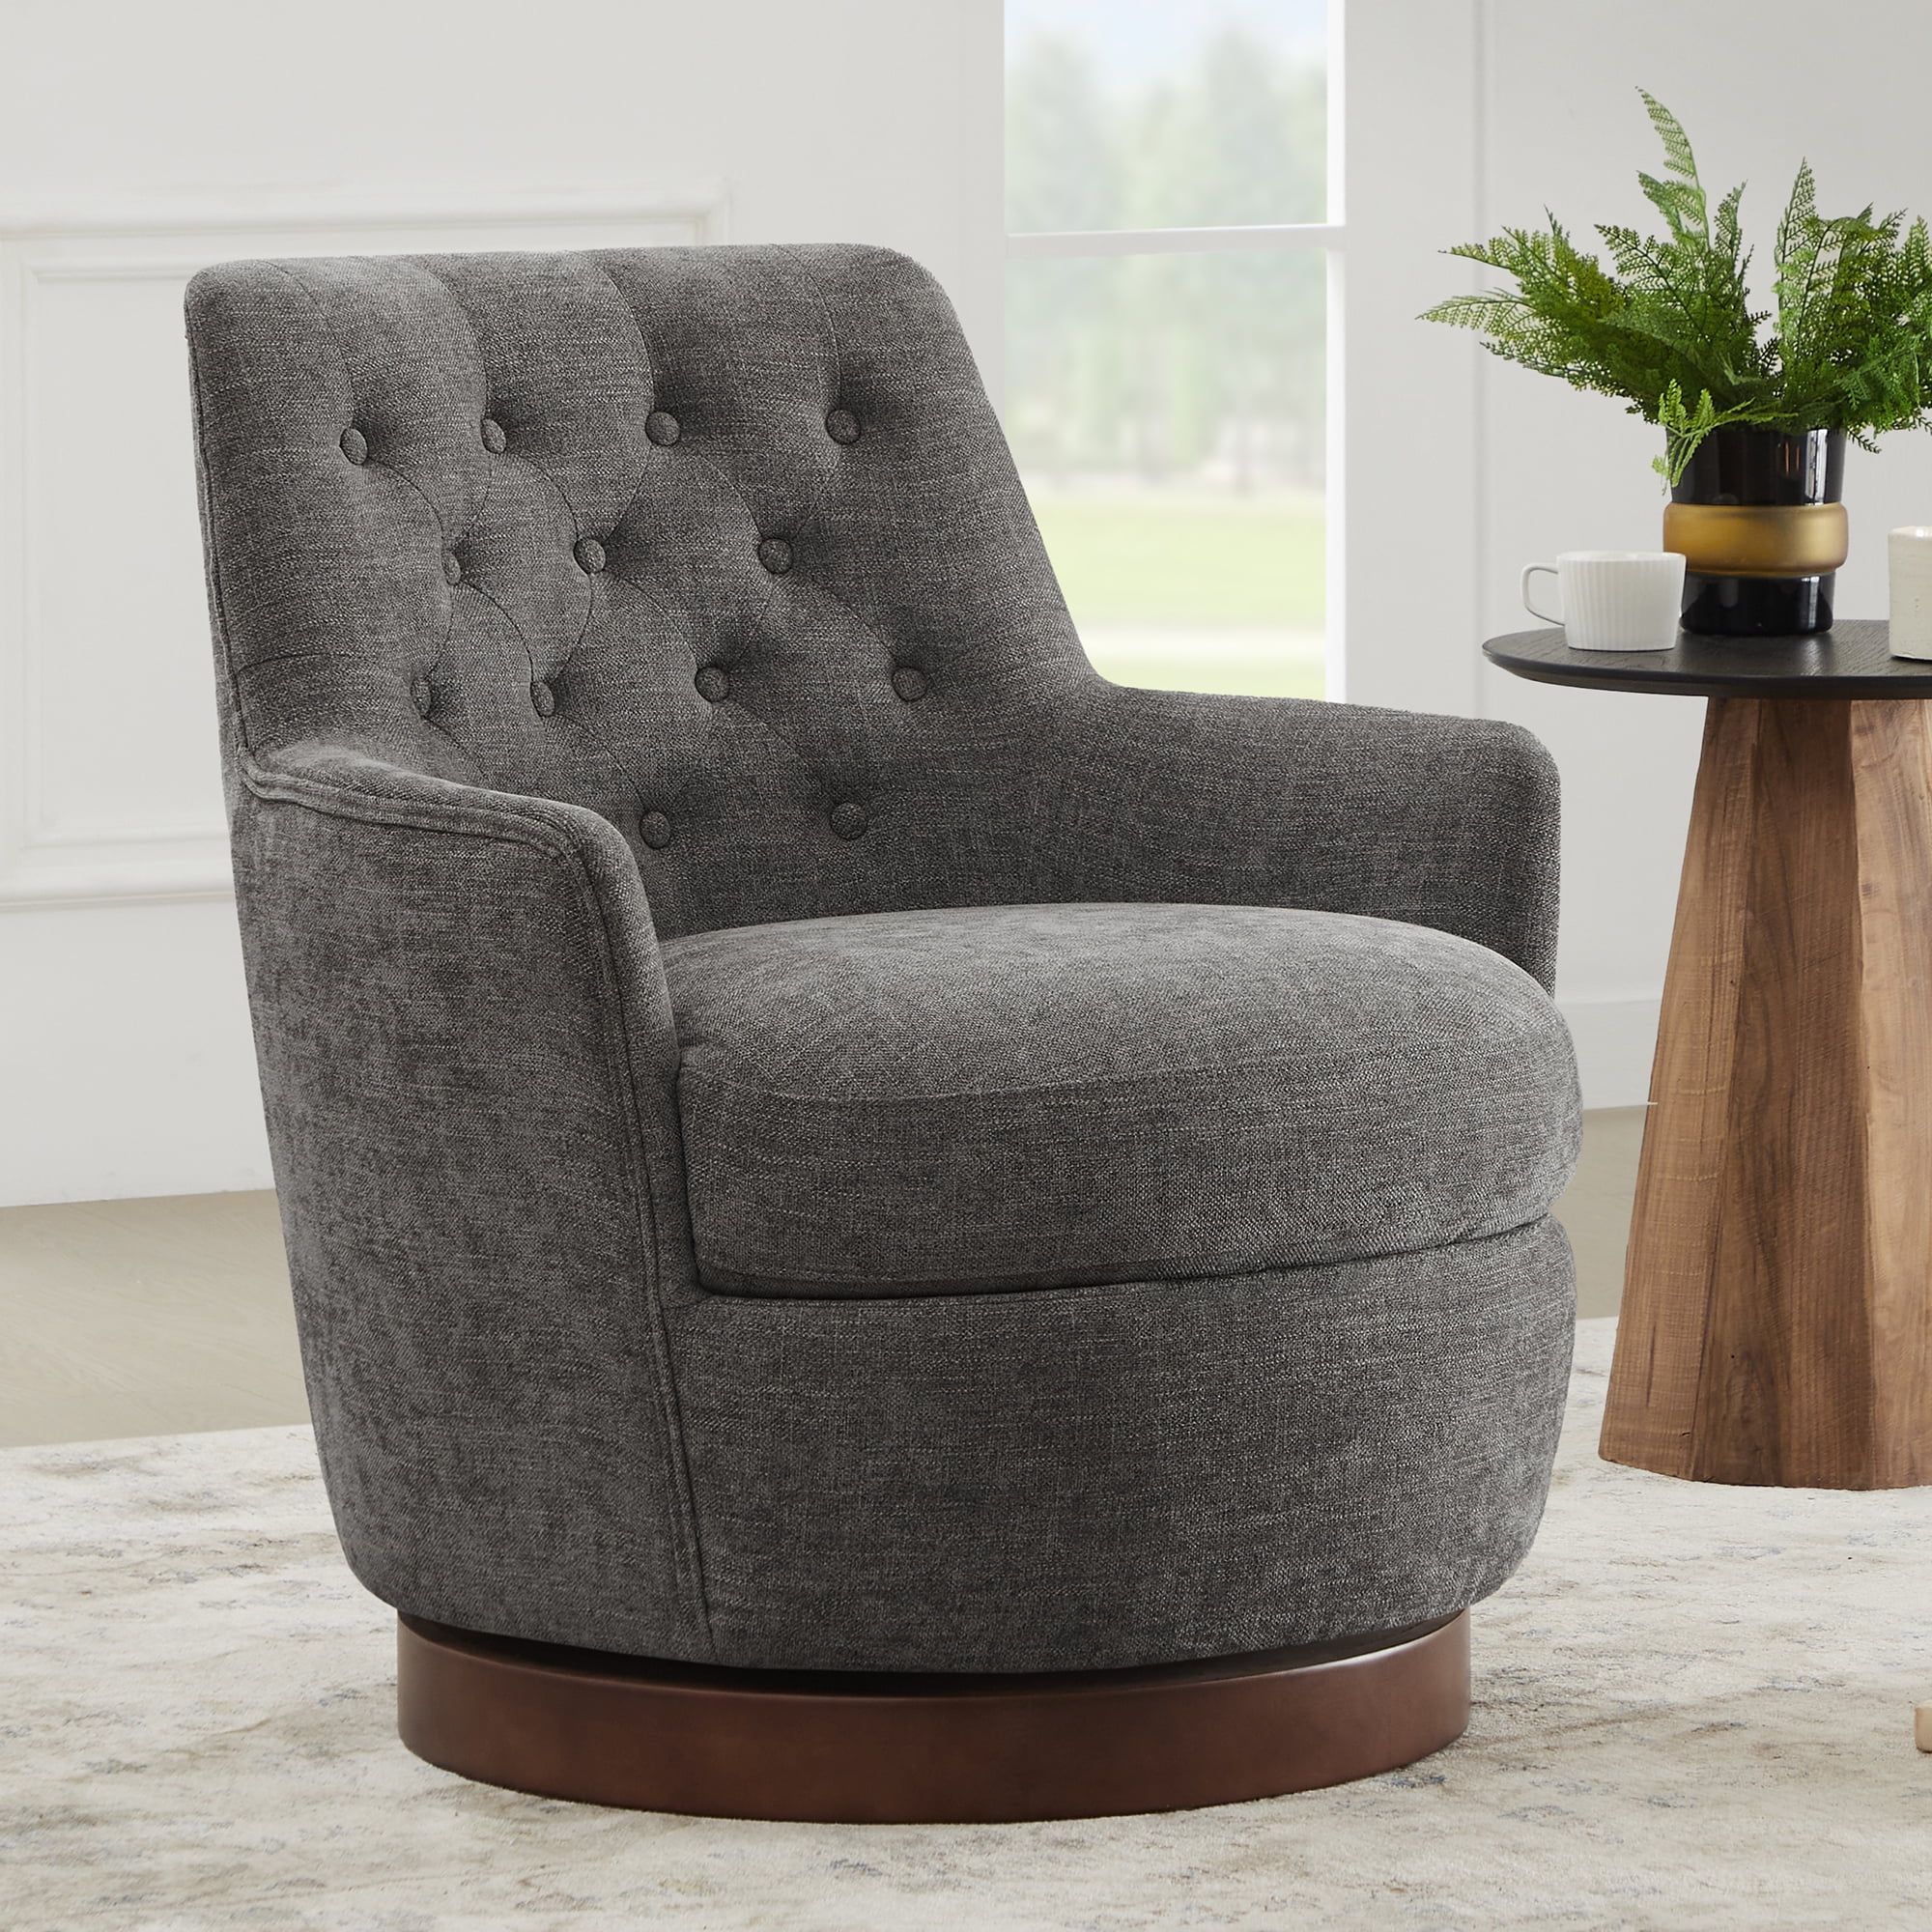 CHITA Swivel Barrel Accent Chair, Tufted Upholstered Arm Chair with Wood Base for Living Room Bed... | Walmart (US)